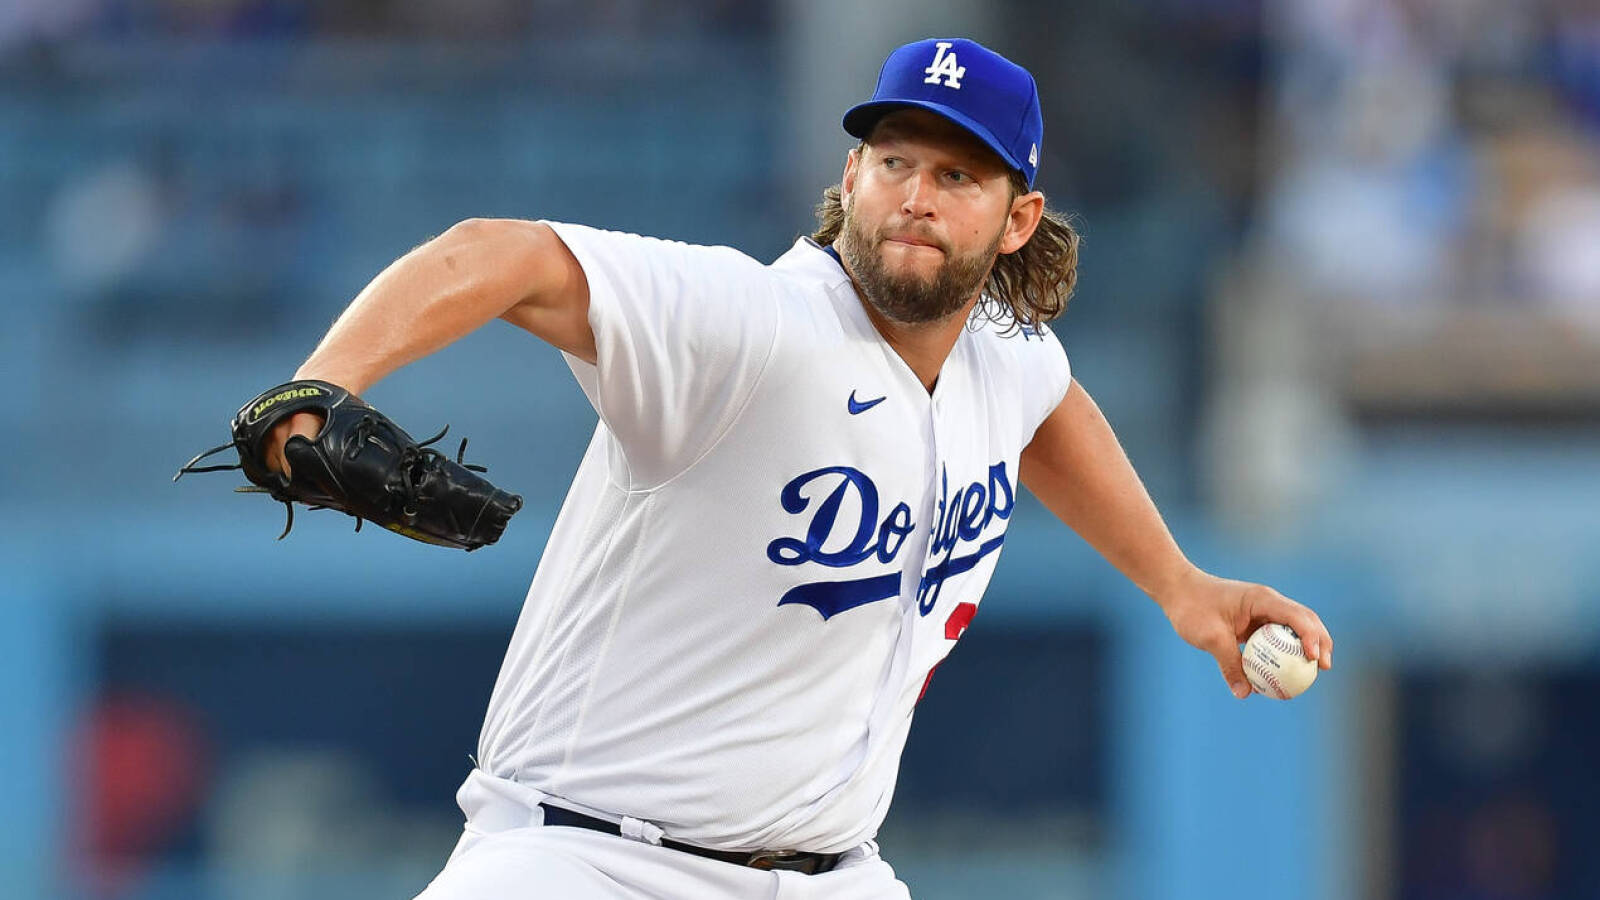 Clayton Kershaw drops hint about his future in surgery announcement